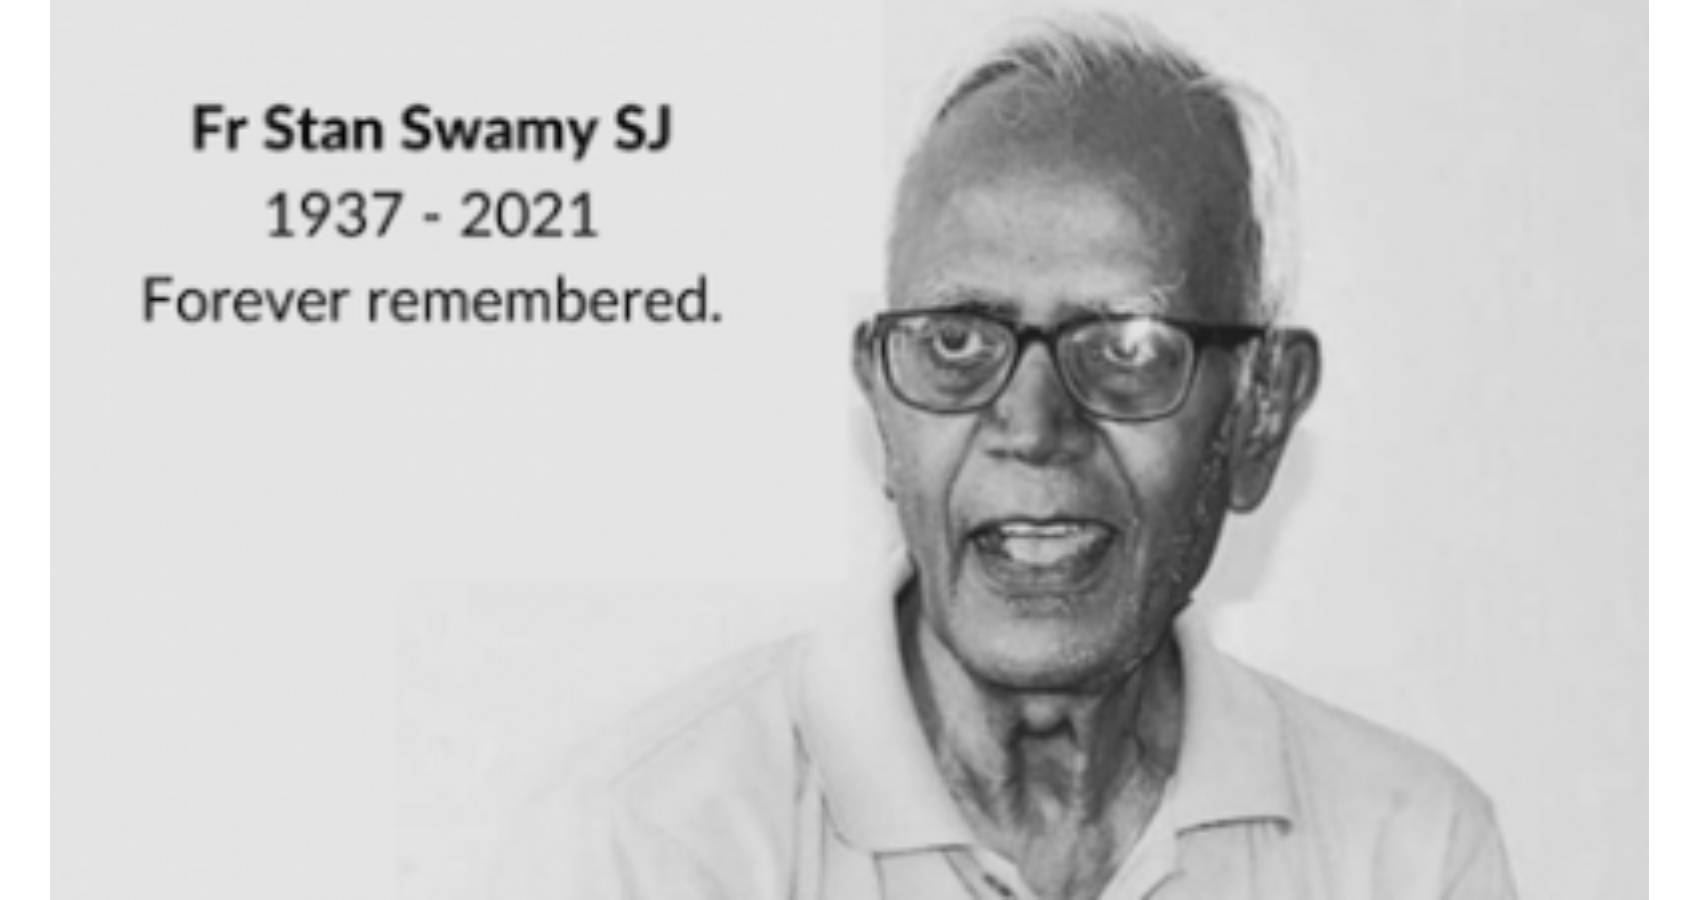 Reflections On The Demise Of Fr. Stan Swamy